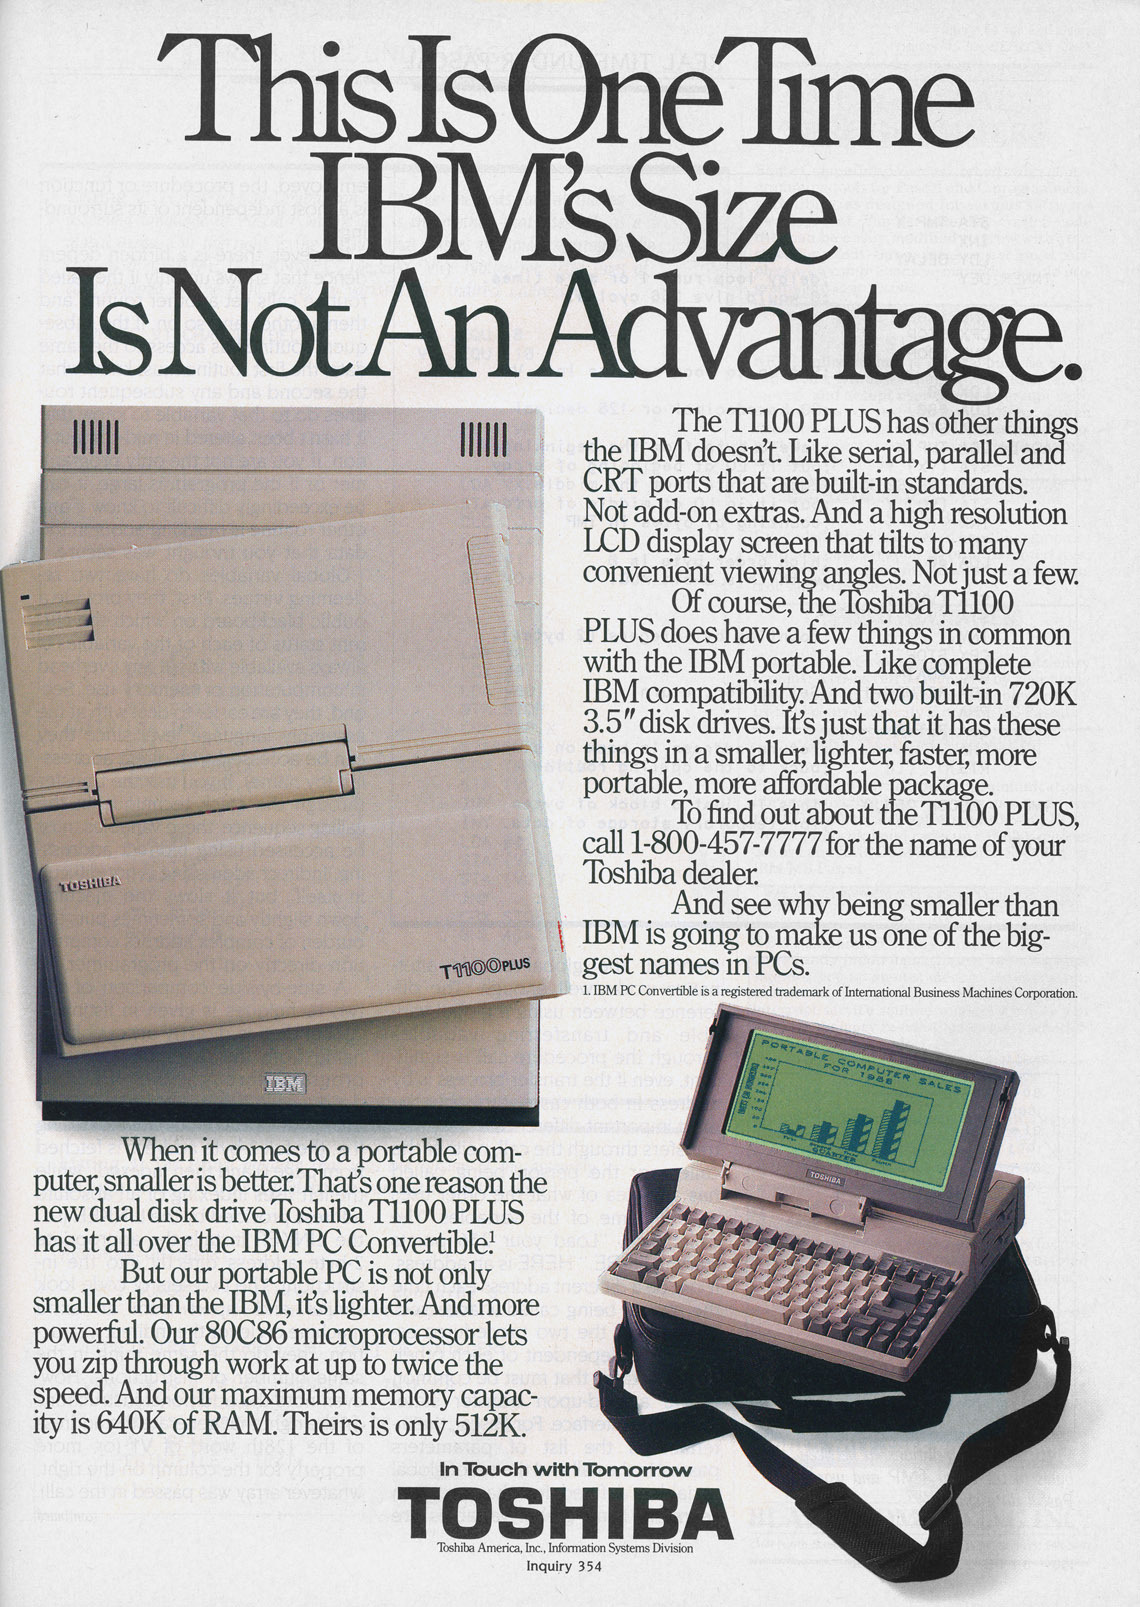 Mid-80s Toshiba adToshiba T1100 Plus is one among the first generation of PC-compatible battery-powered notebook computers. There were only about five competitors (each with just one product) and IBM was the biggest one. T1100 Plus was clearly...